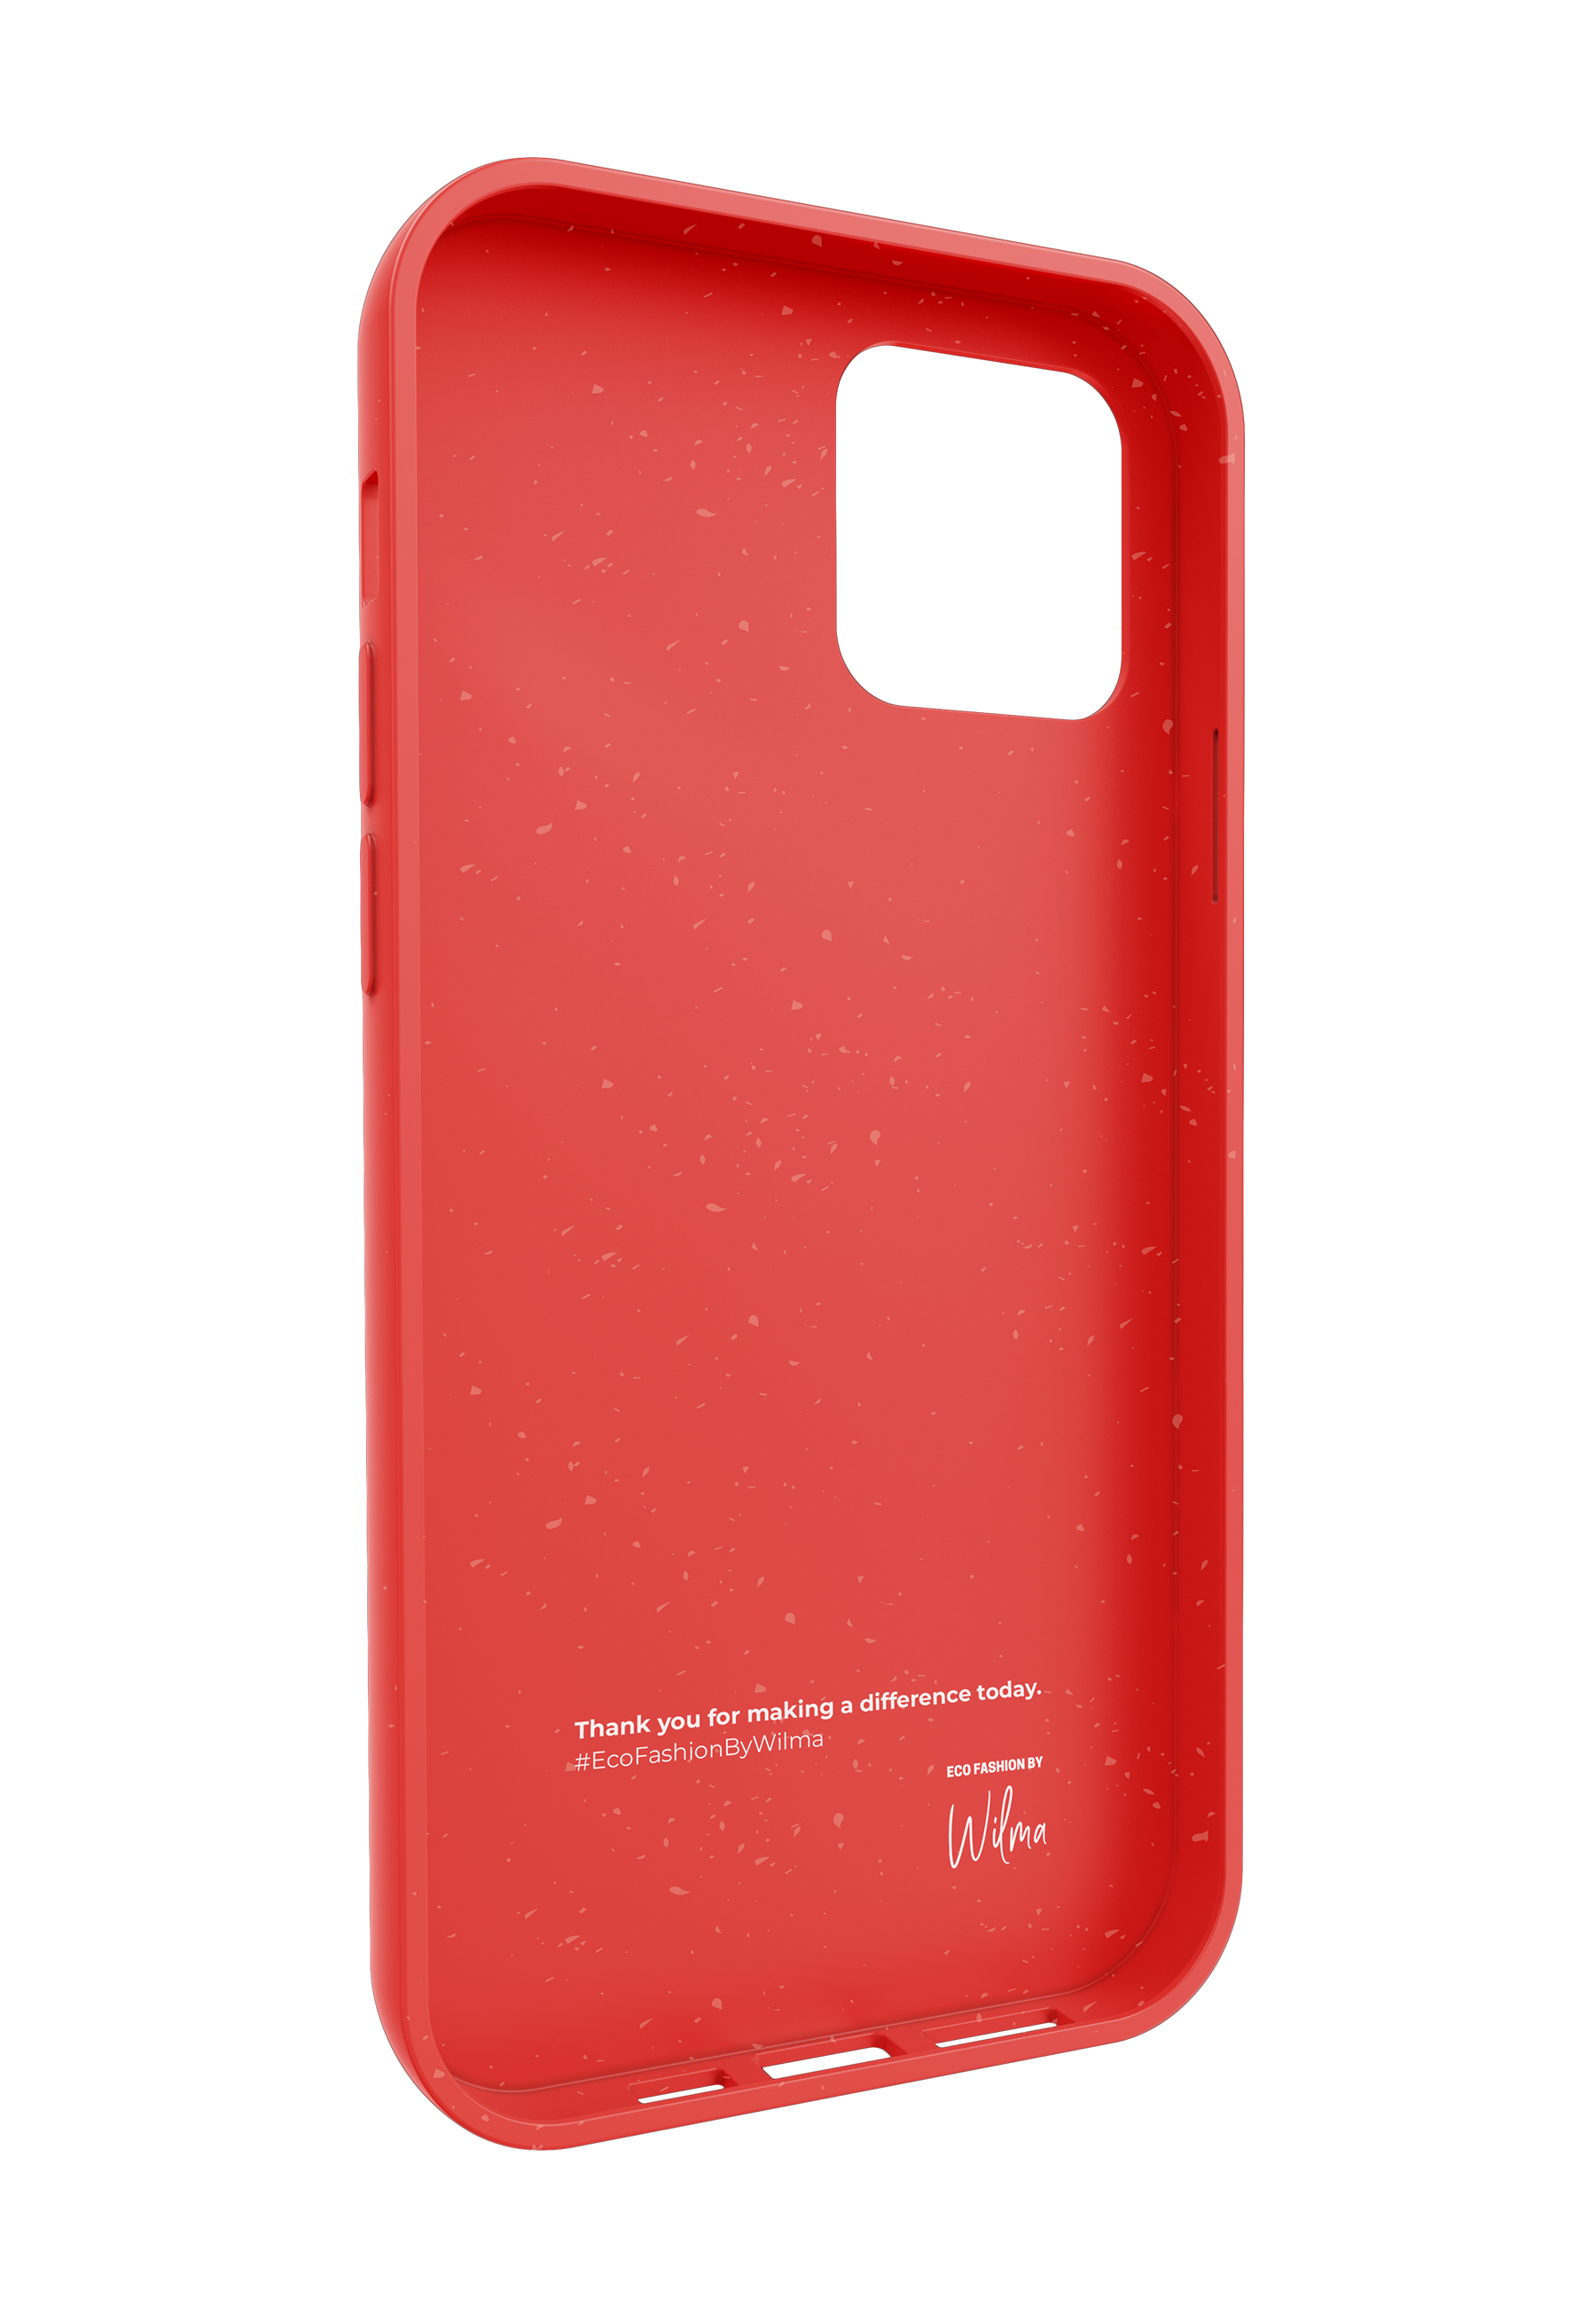 Backcover, BY FASHION ECO P12PM, WILMA Apple, iPhone 12 red Pro Max,